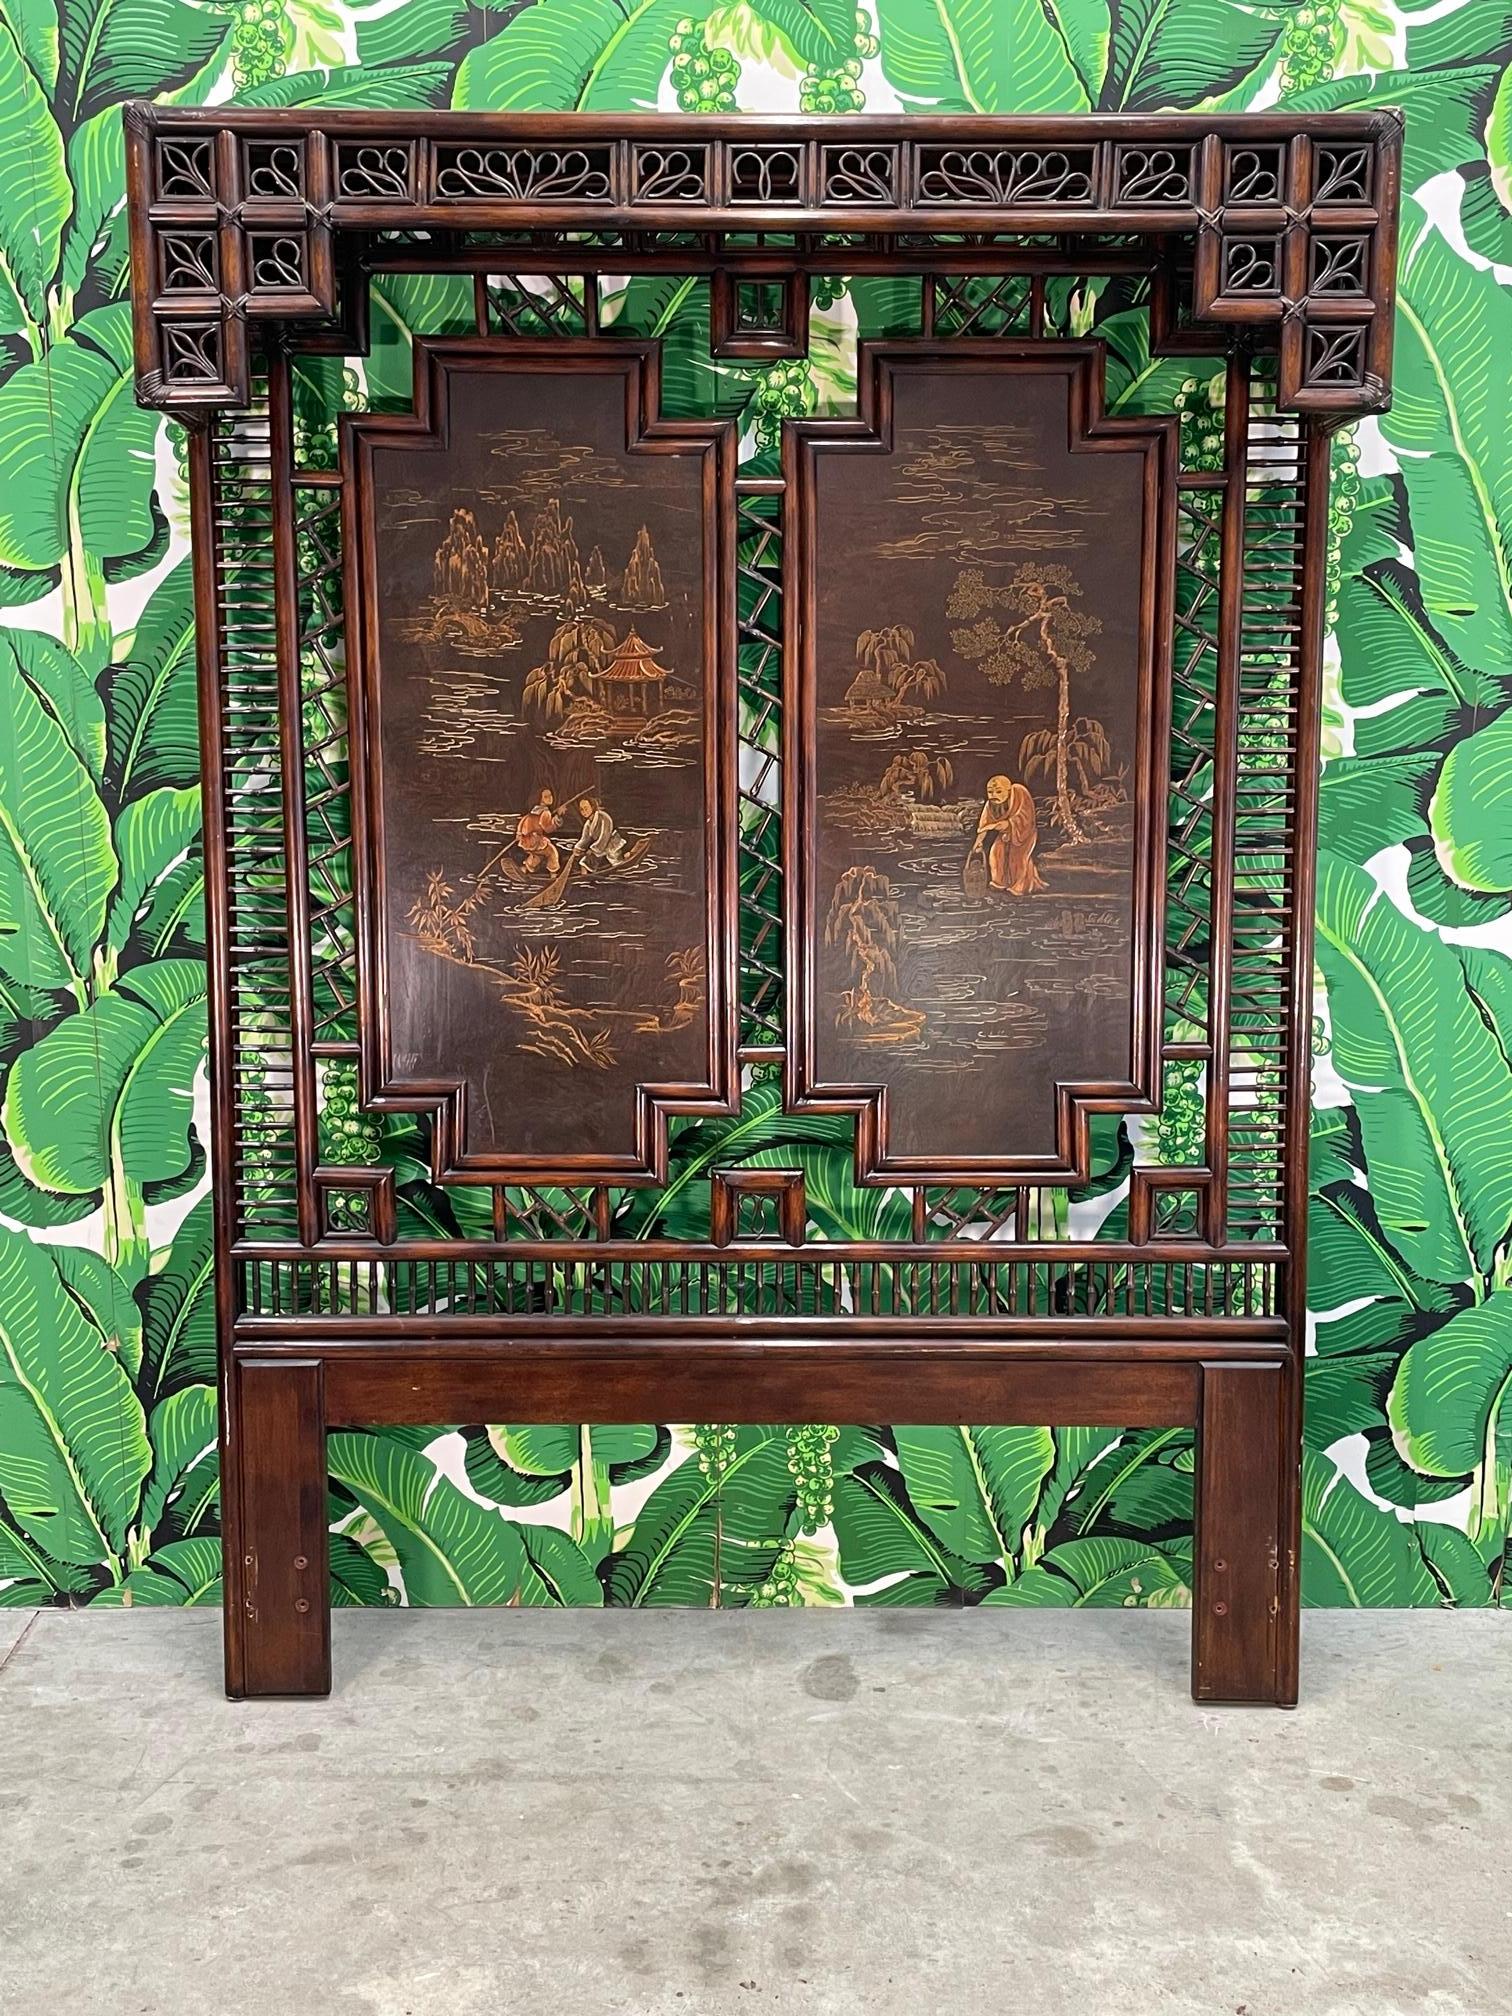 Large canopy headboard by Henredon features rattan construction and Chinese artwork. Queen size. Good condition with minor imperfections consistent with age, see photos for condition details.
For a shipping quote to your exact zip code, please